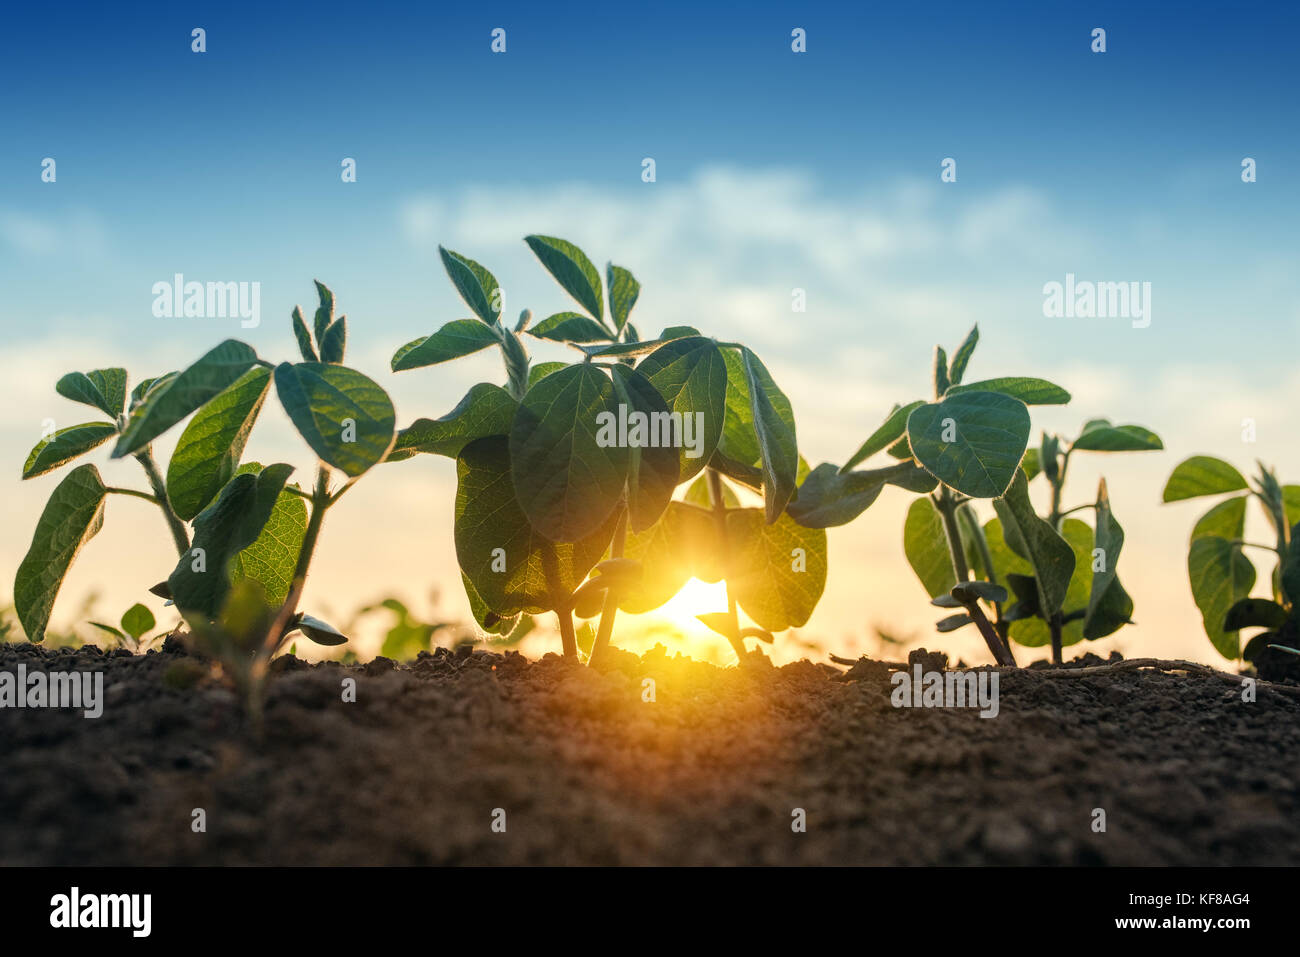 Sunrise in soybean field, sunlight beaming through the leaves of small green young plants of soya Stock Photo